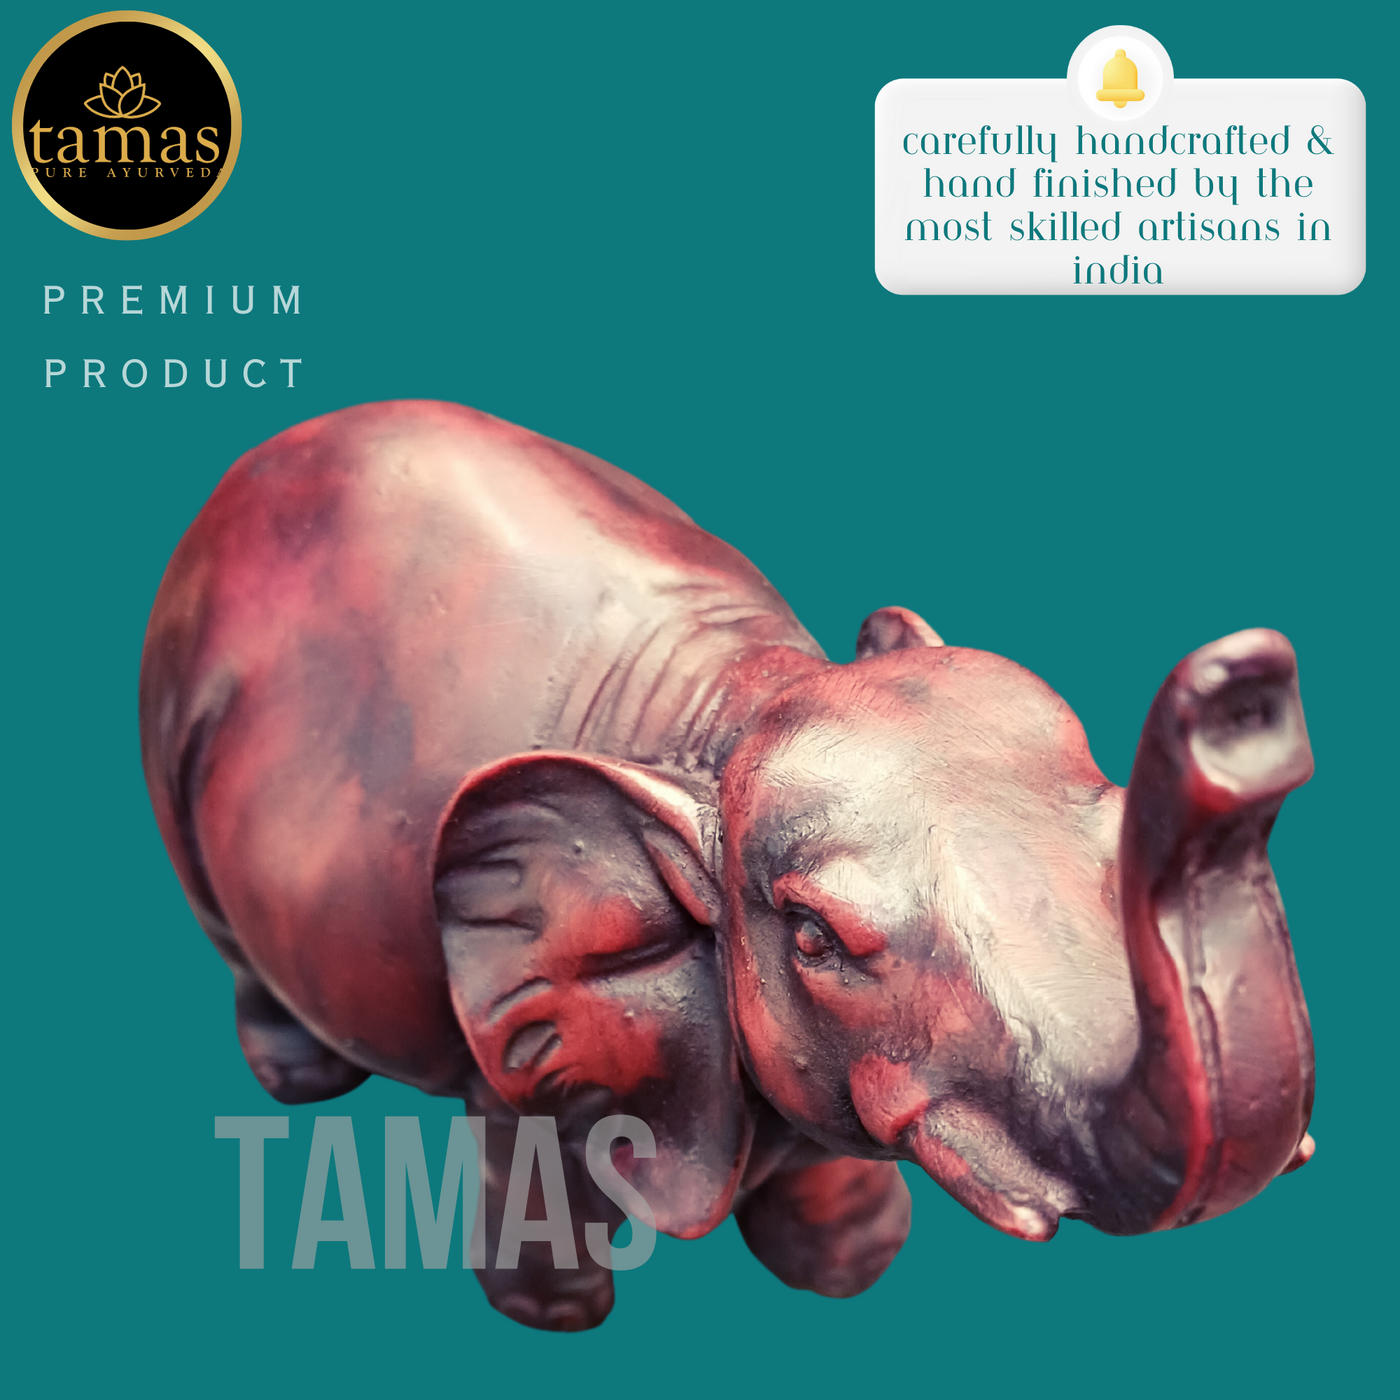 Tamas Elephant Poly Resin Statue (6 Inches)